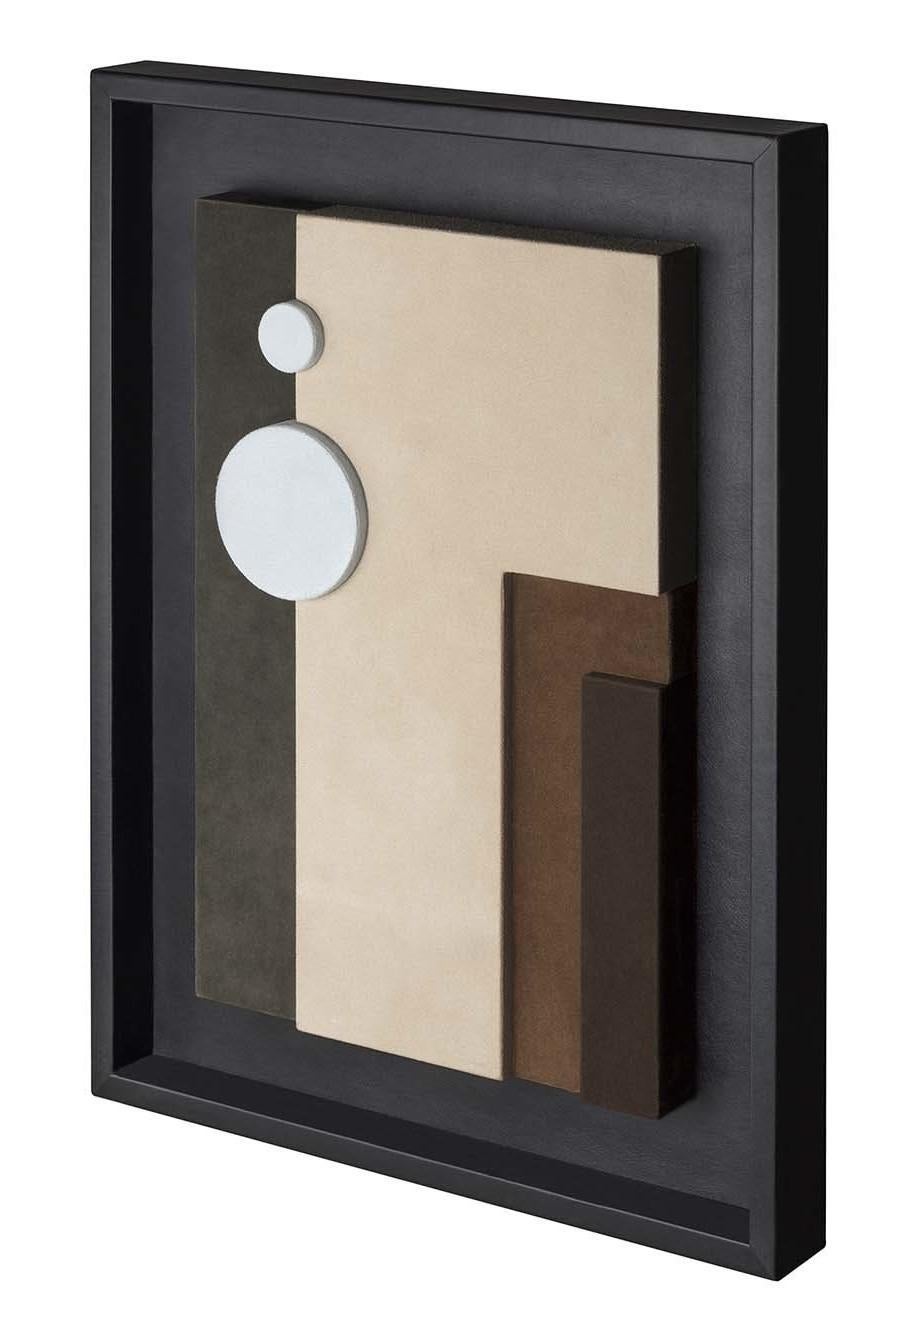 Designed by GioBagnara in a limited series of abstract designs, this superb wall sculpture mixes the smooth texture of the black nappa frame with the soft velvet feel of the suede interior, a unique piece that will become the focal point in any